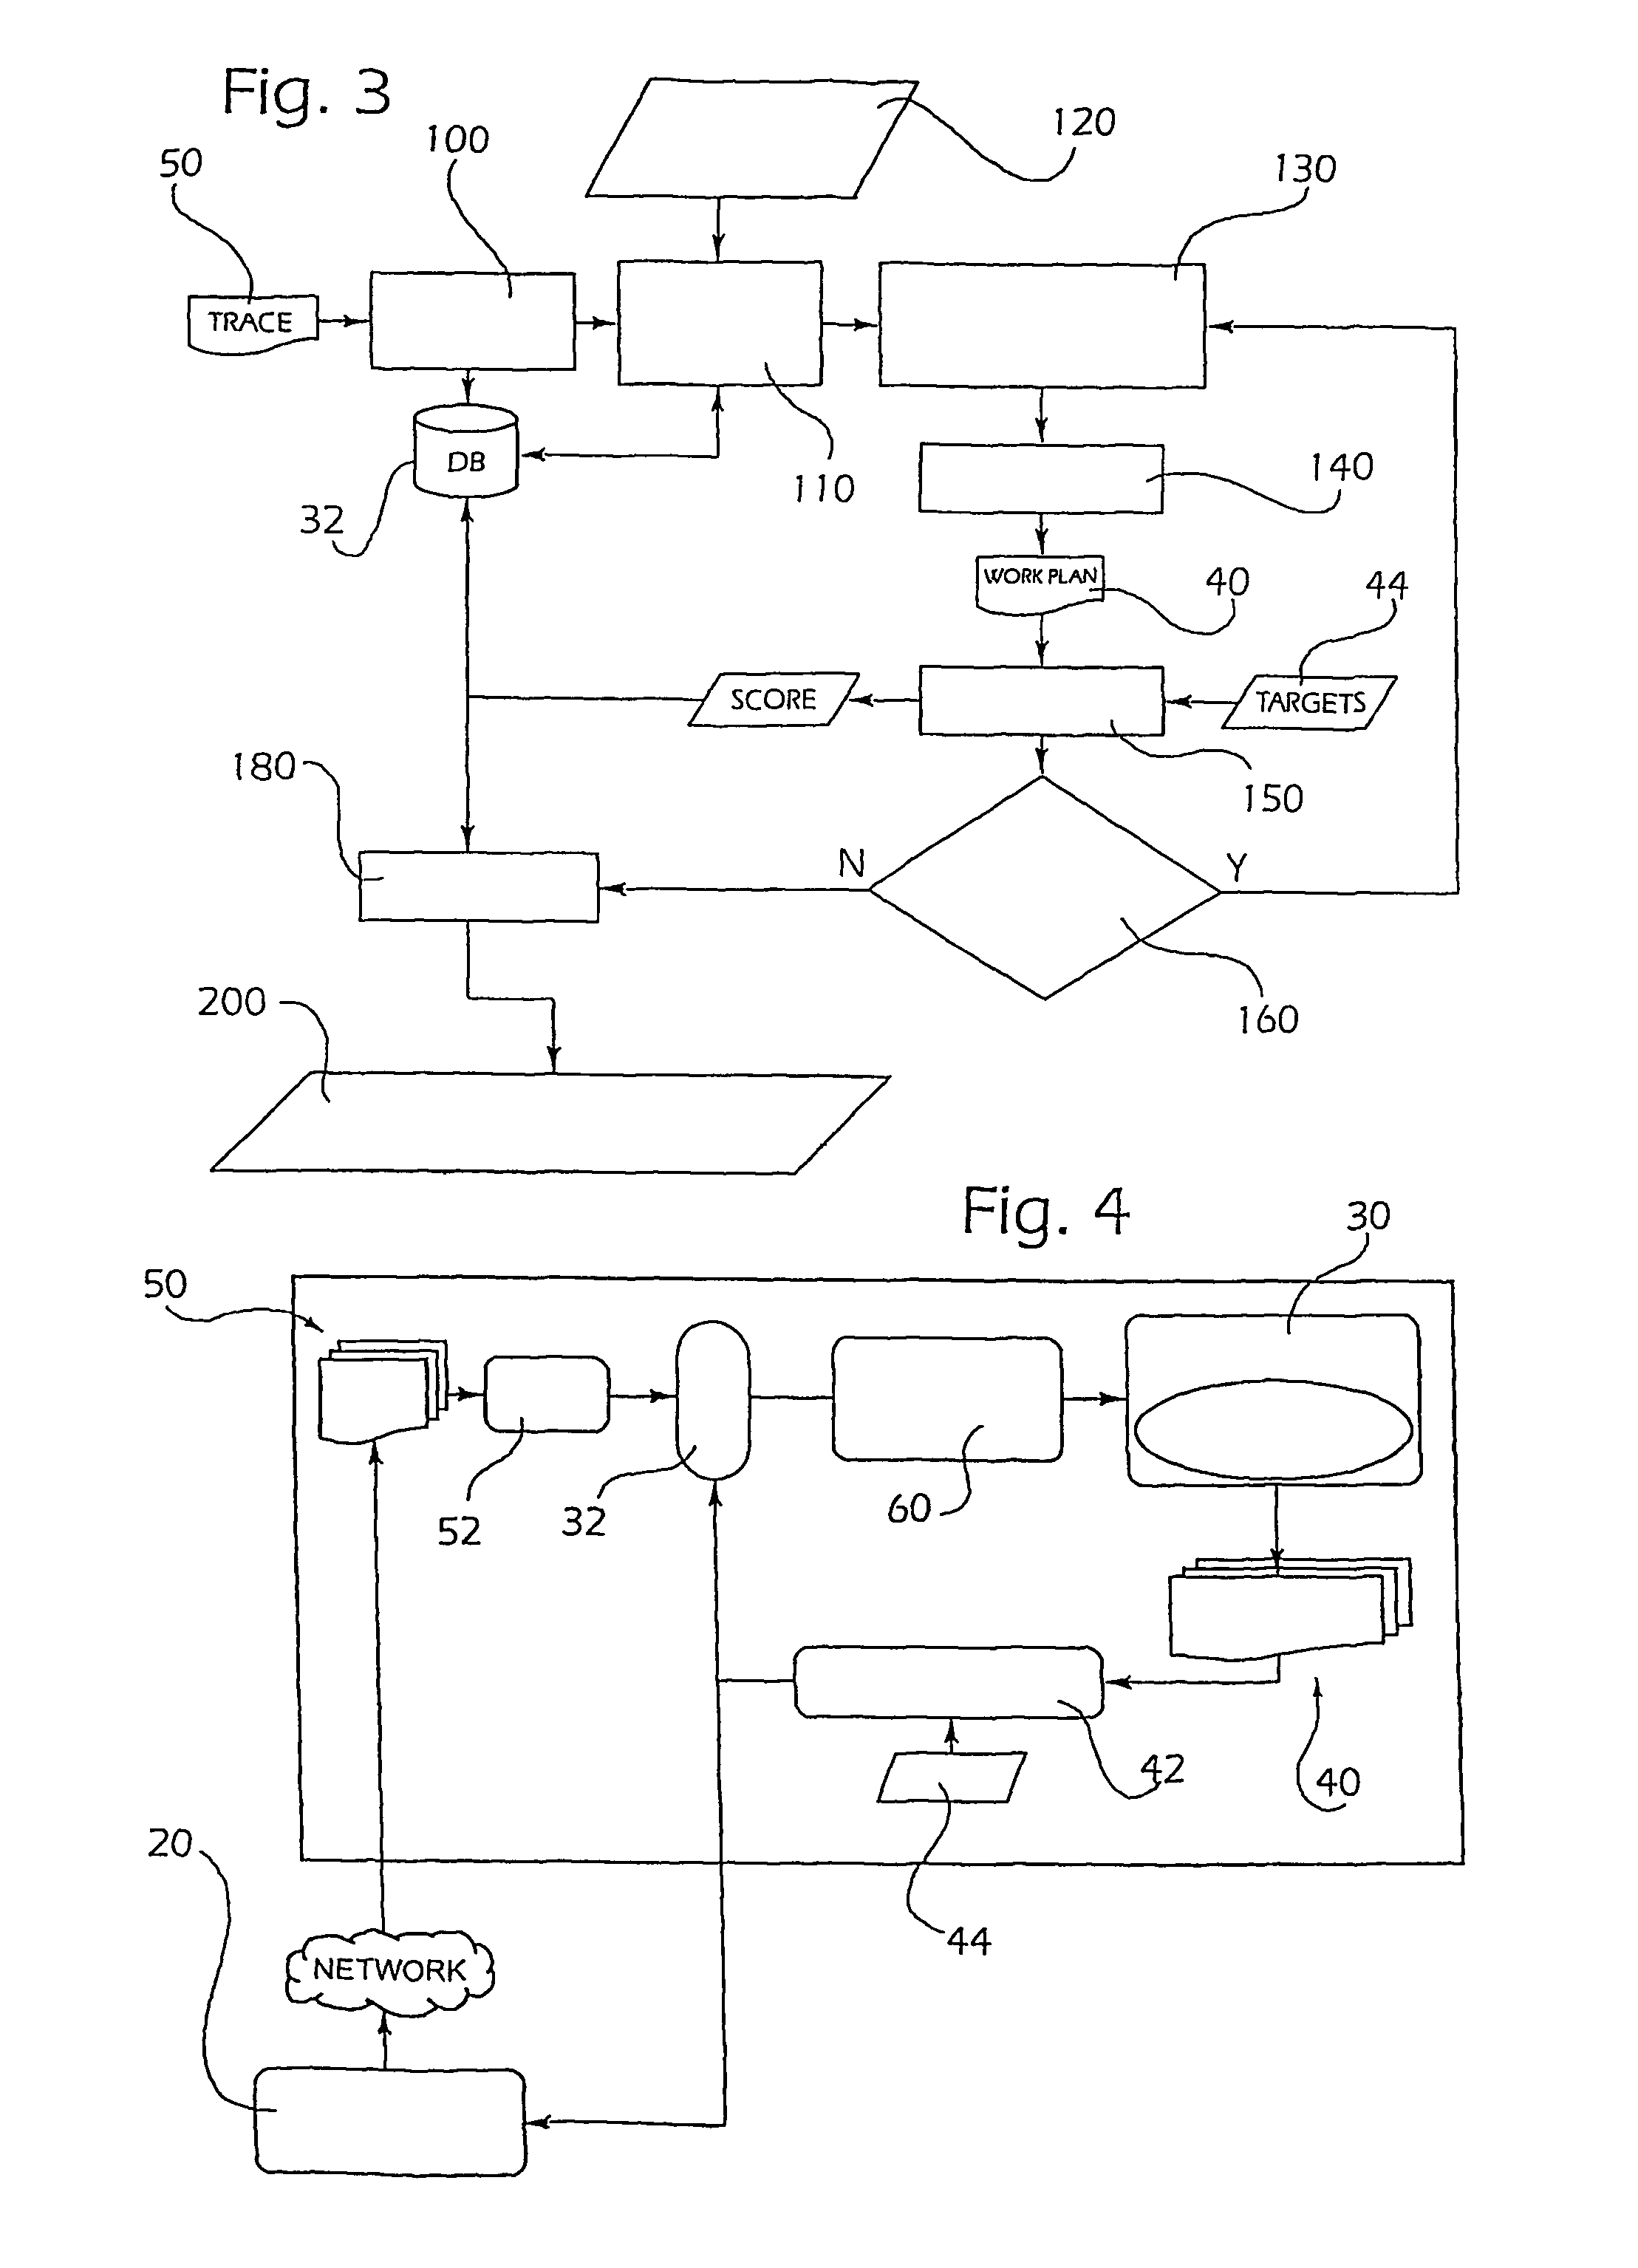 Method and system for tuning a taskscheduling process